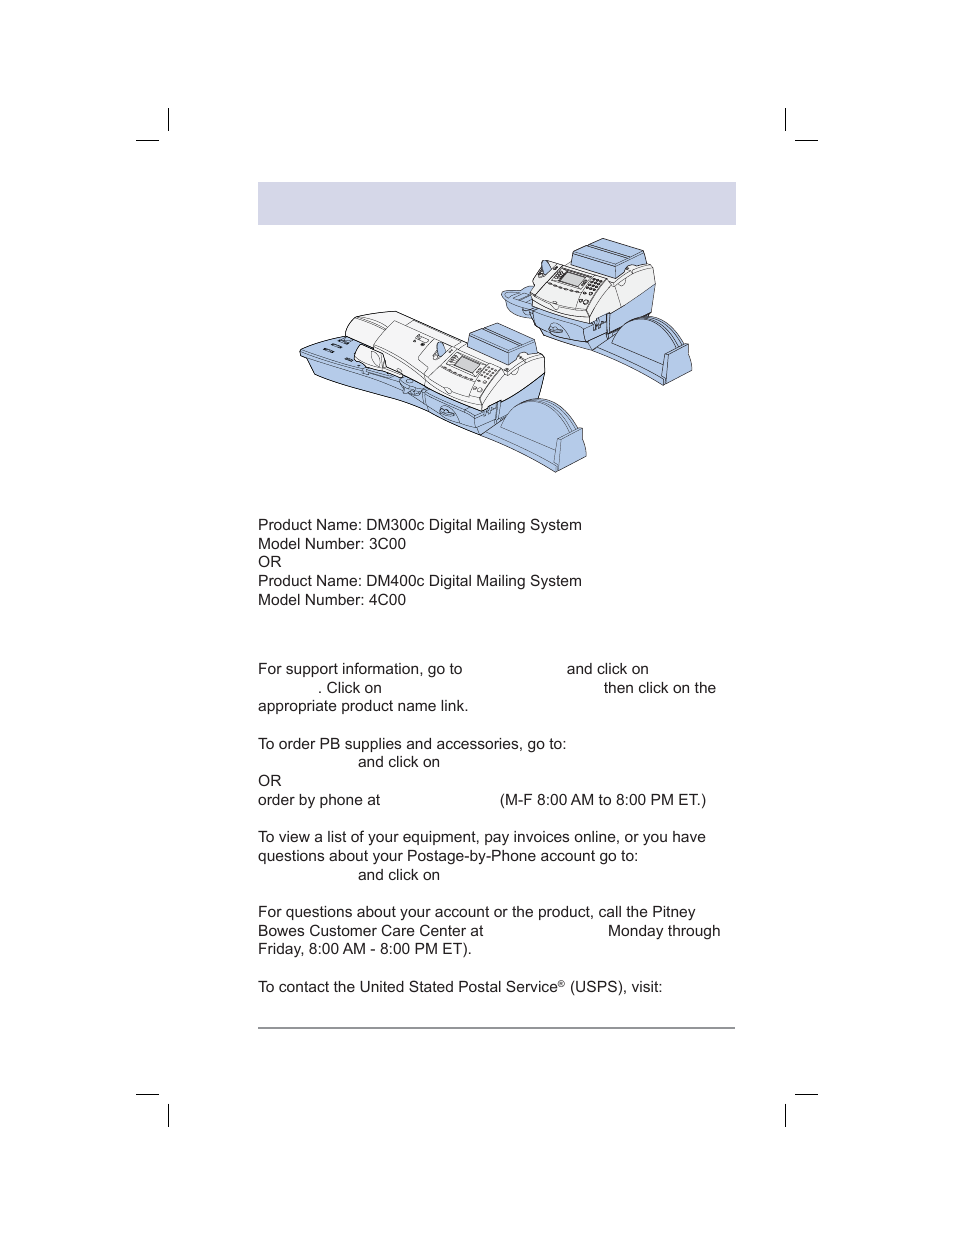 Pitney bowes contact list | Pitney Bowes DM400C User Manual | Page 5 / 196